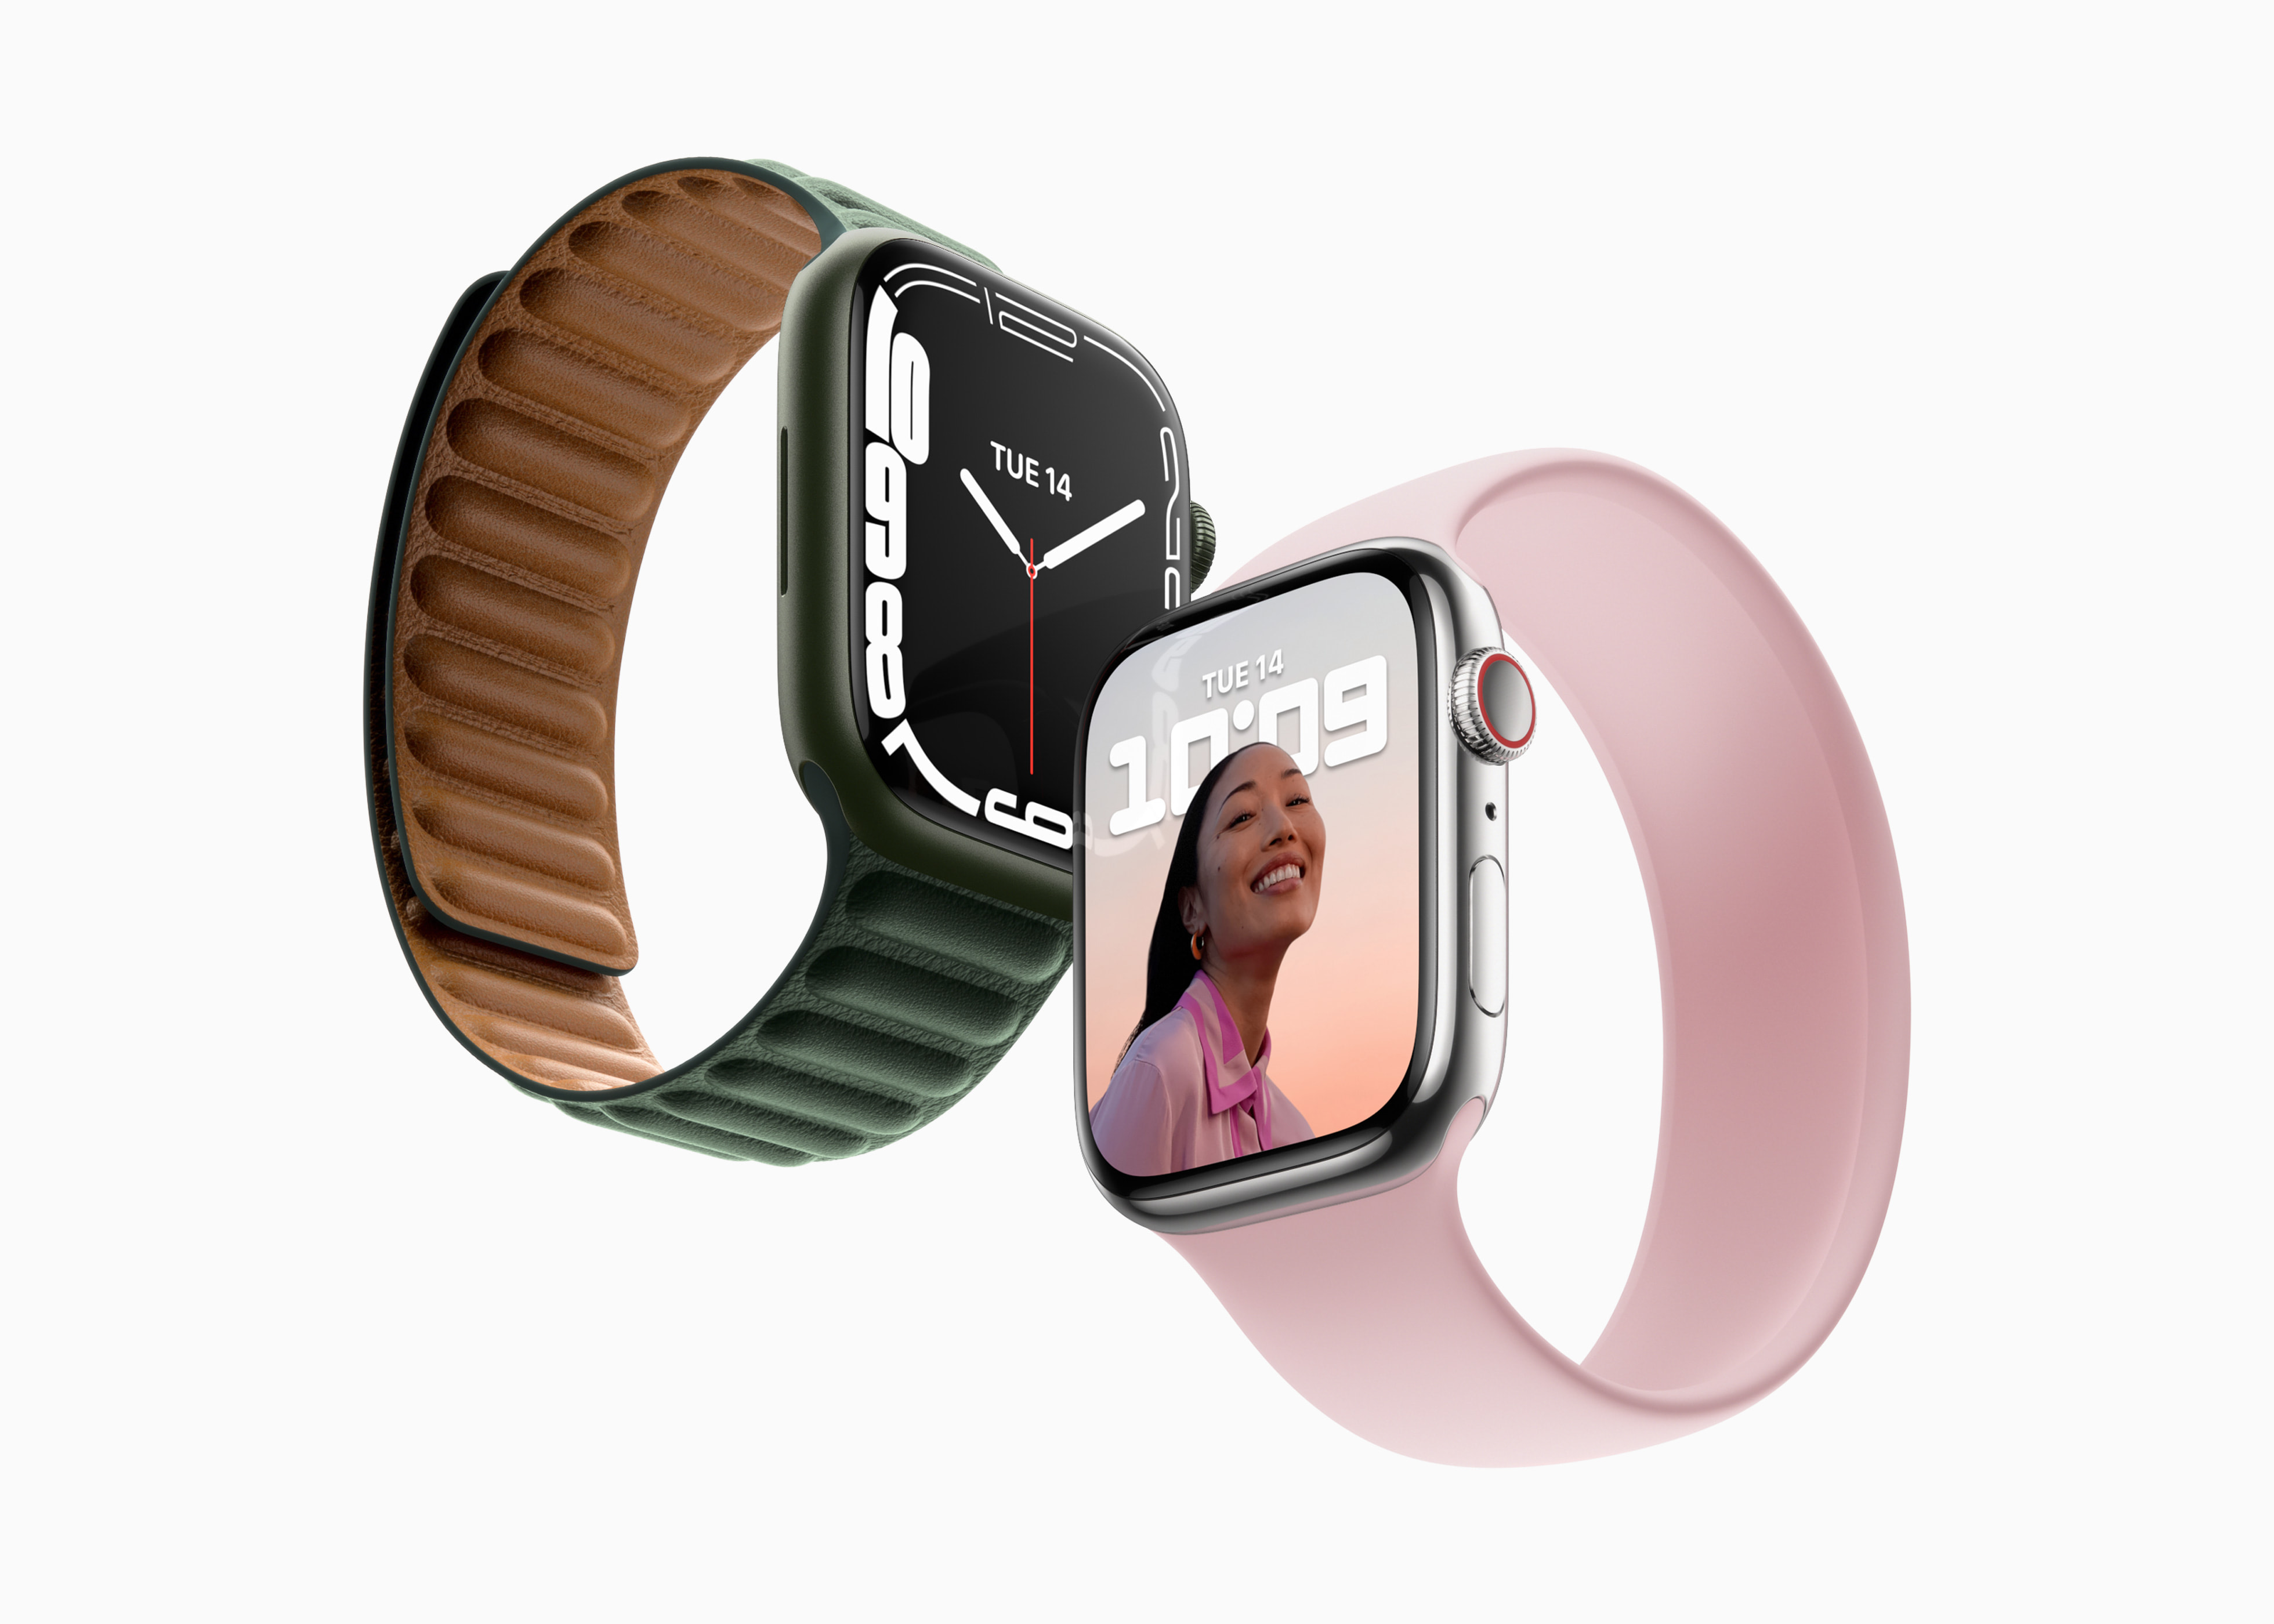 Do You Need a Data Plan for Your Apple Watch? 8